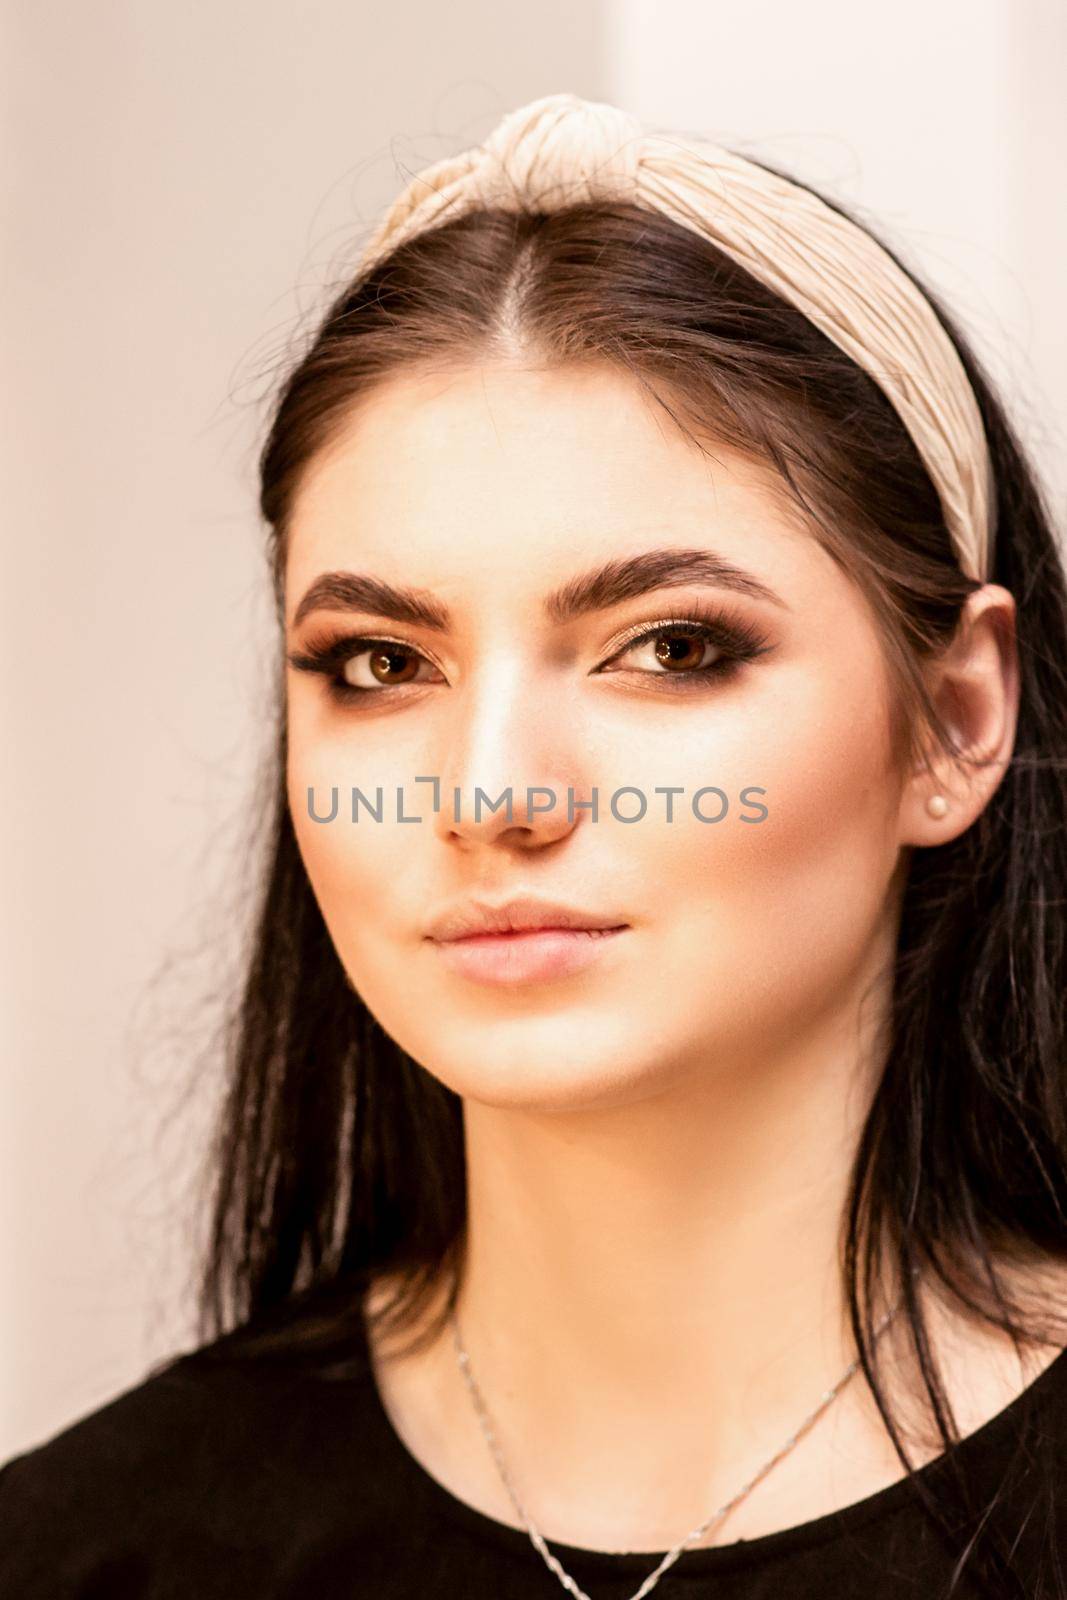 The fashionable young woman. Portrait of the beautiful female model with long hair and makeup. Beauty young caucasian woman with a hoop on her head. by okskukuruza